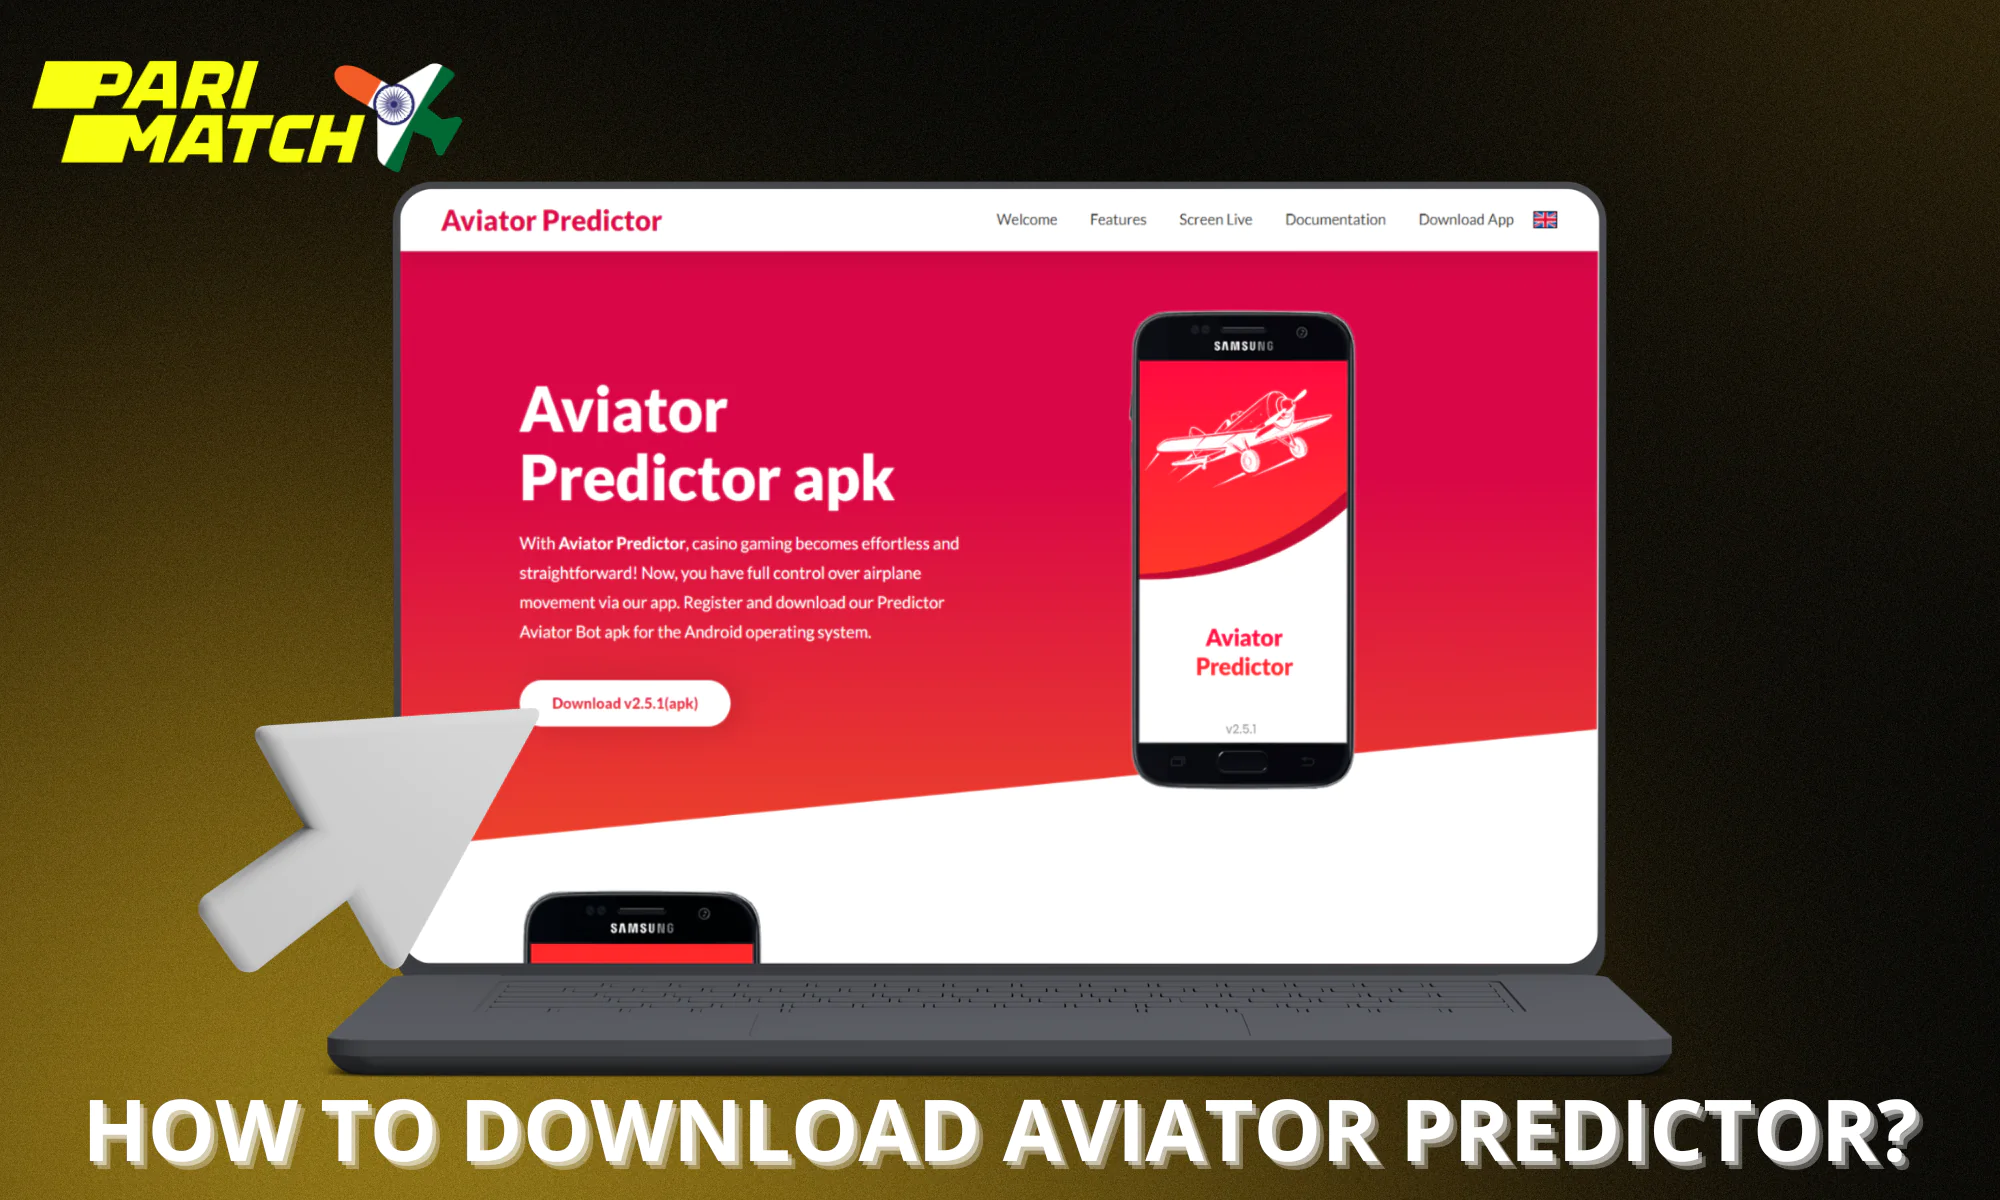 Step by step instructions on how to download Parimatch Aviator Predictor